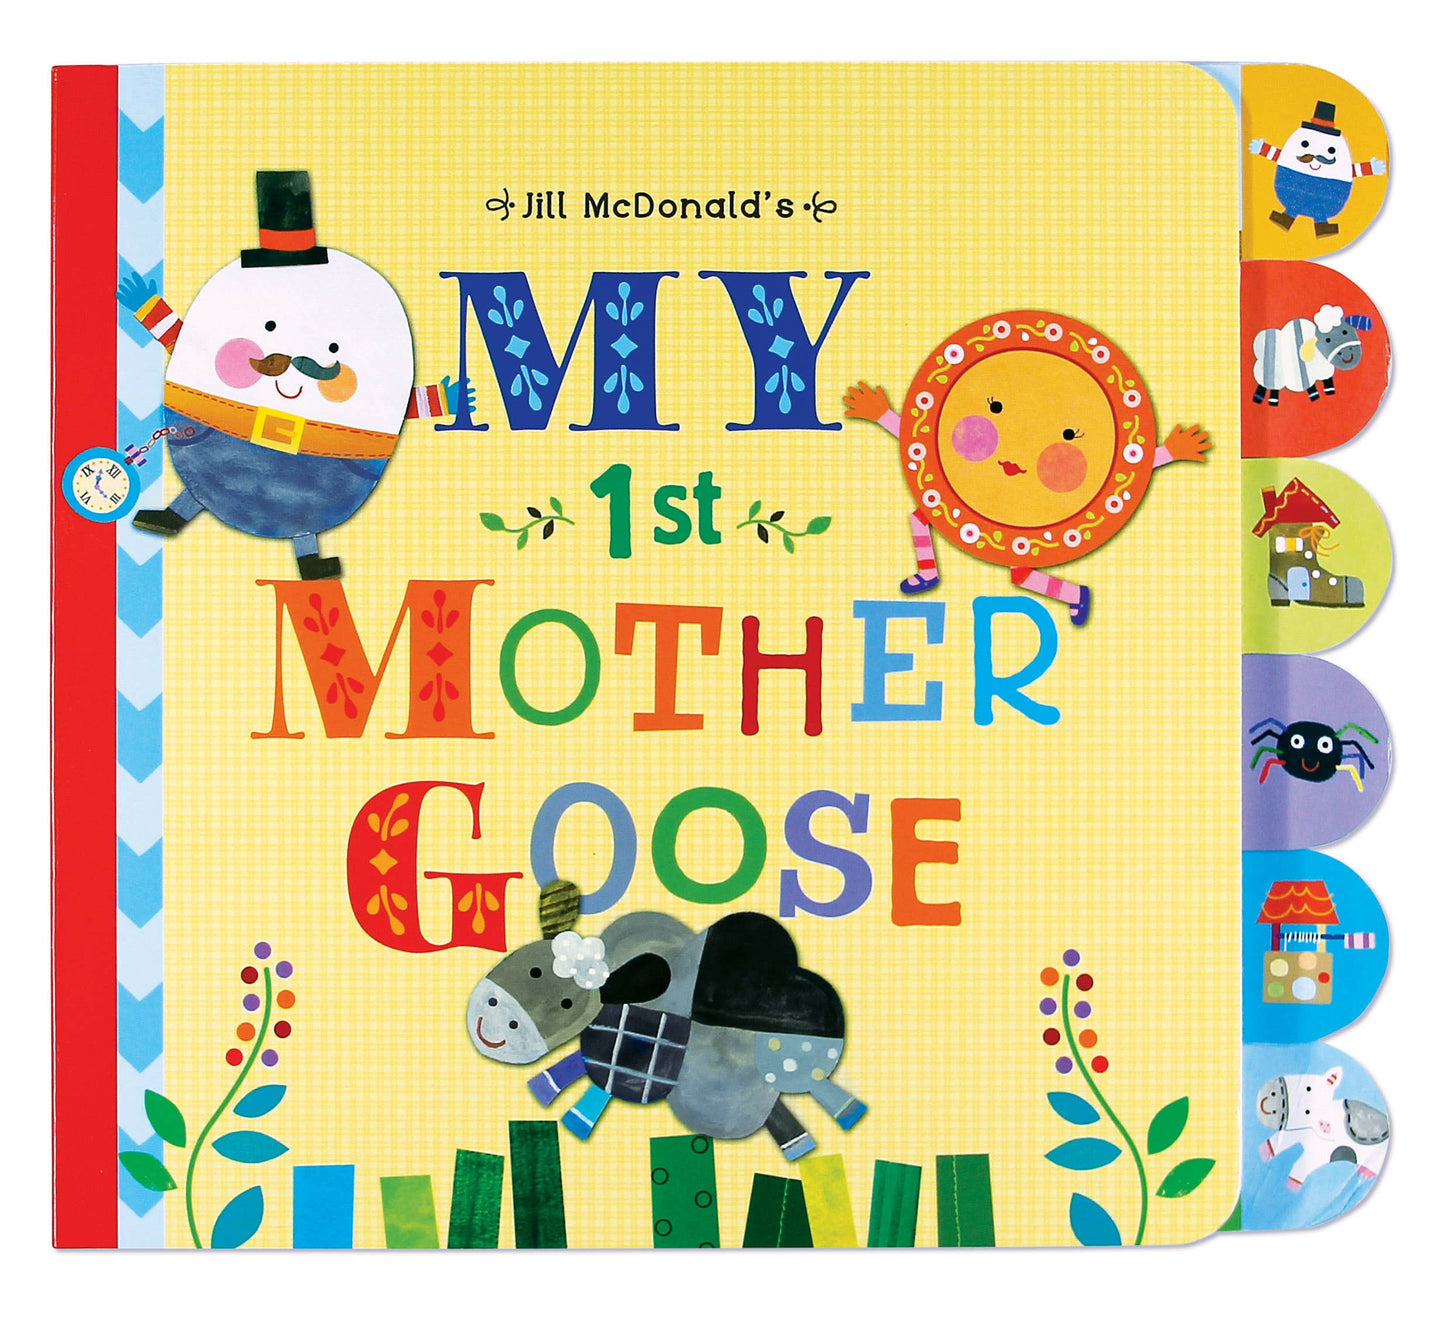 C.R.Gibson Signature | Baby & Kids - Mother Goose Board Book